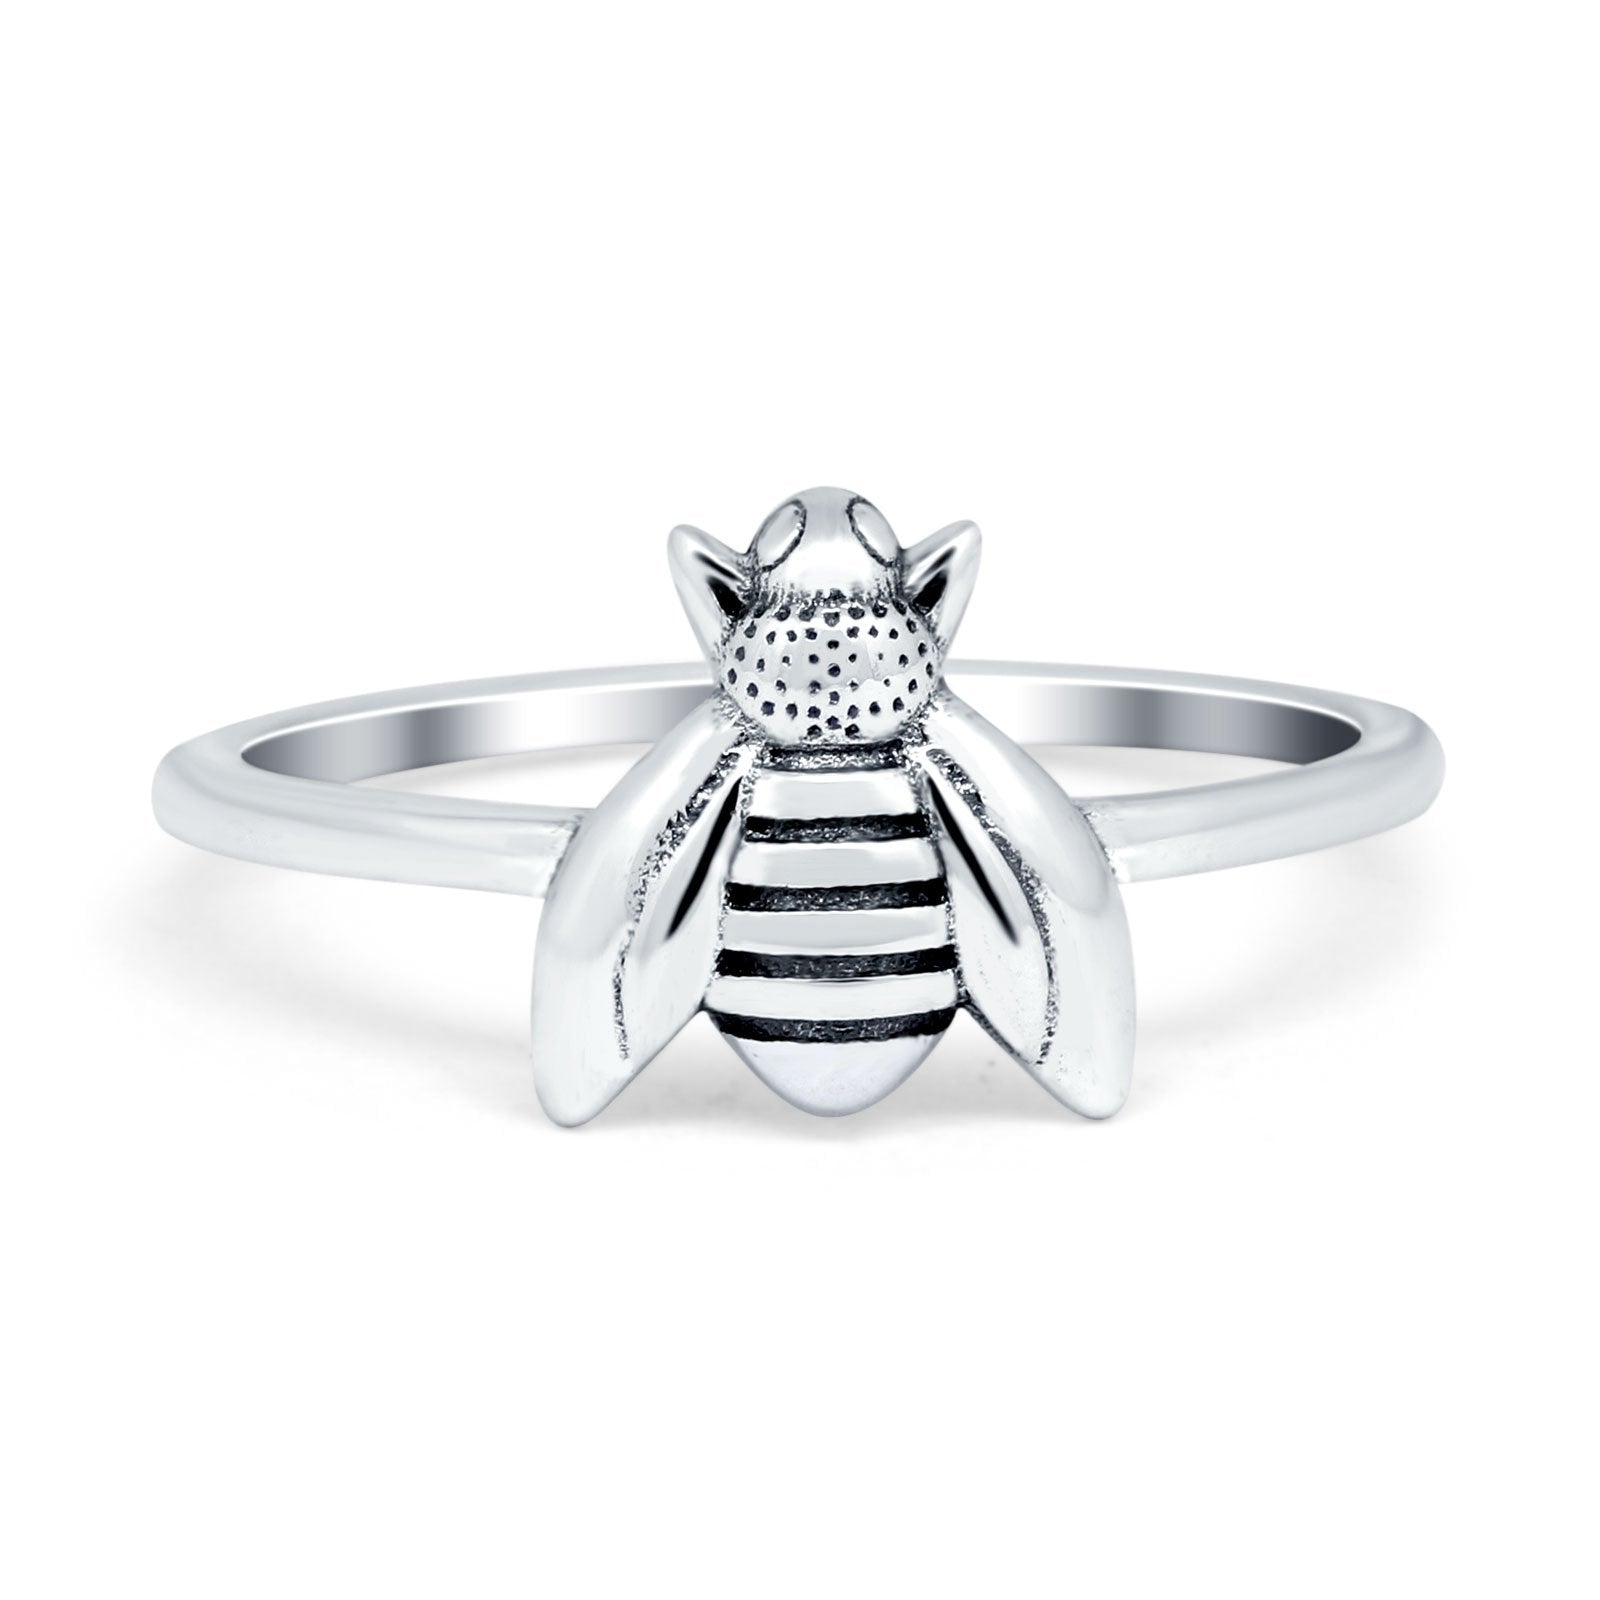 Bumble Bee Plain Ring Oxidized Band 925 Sterling Silver